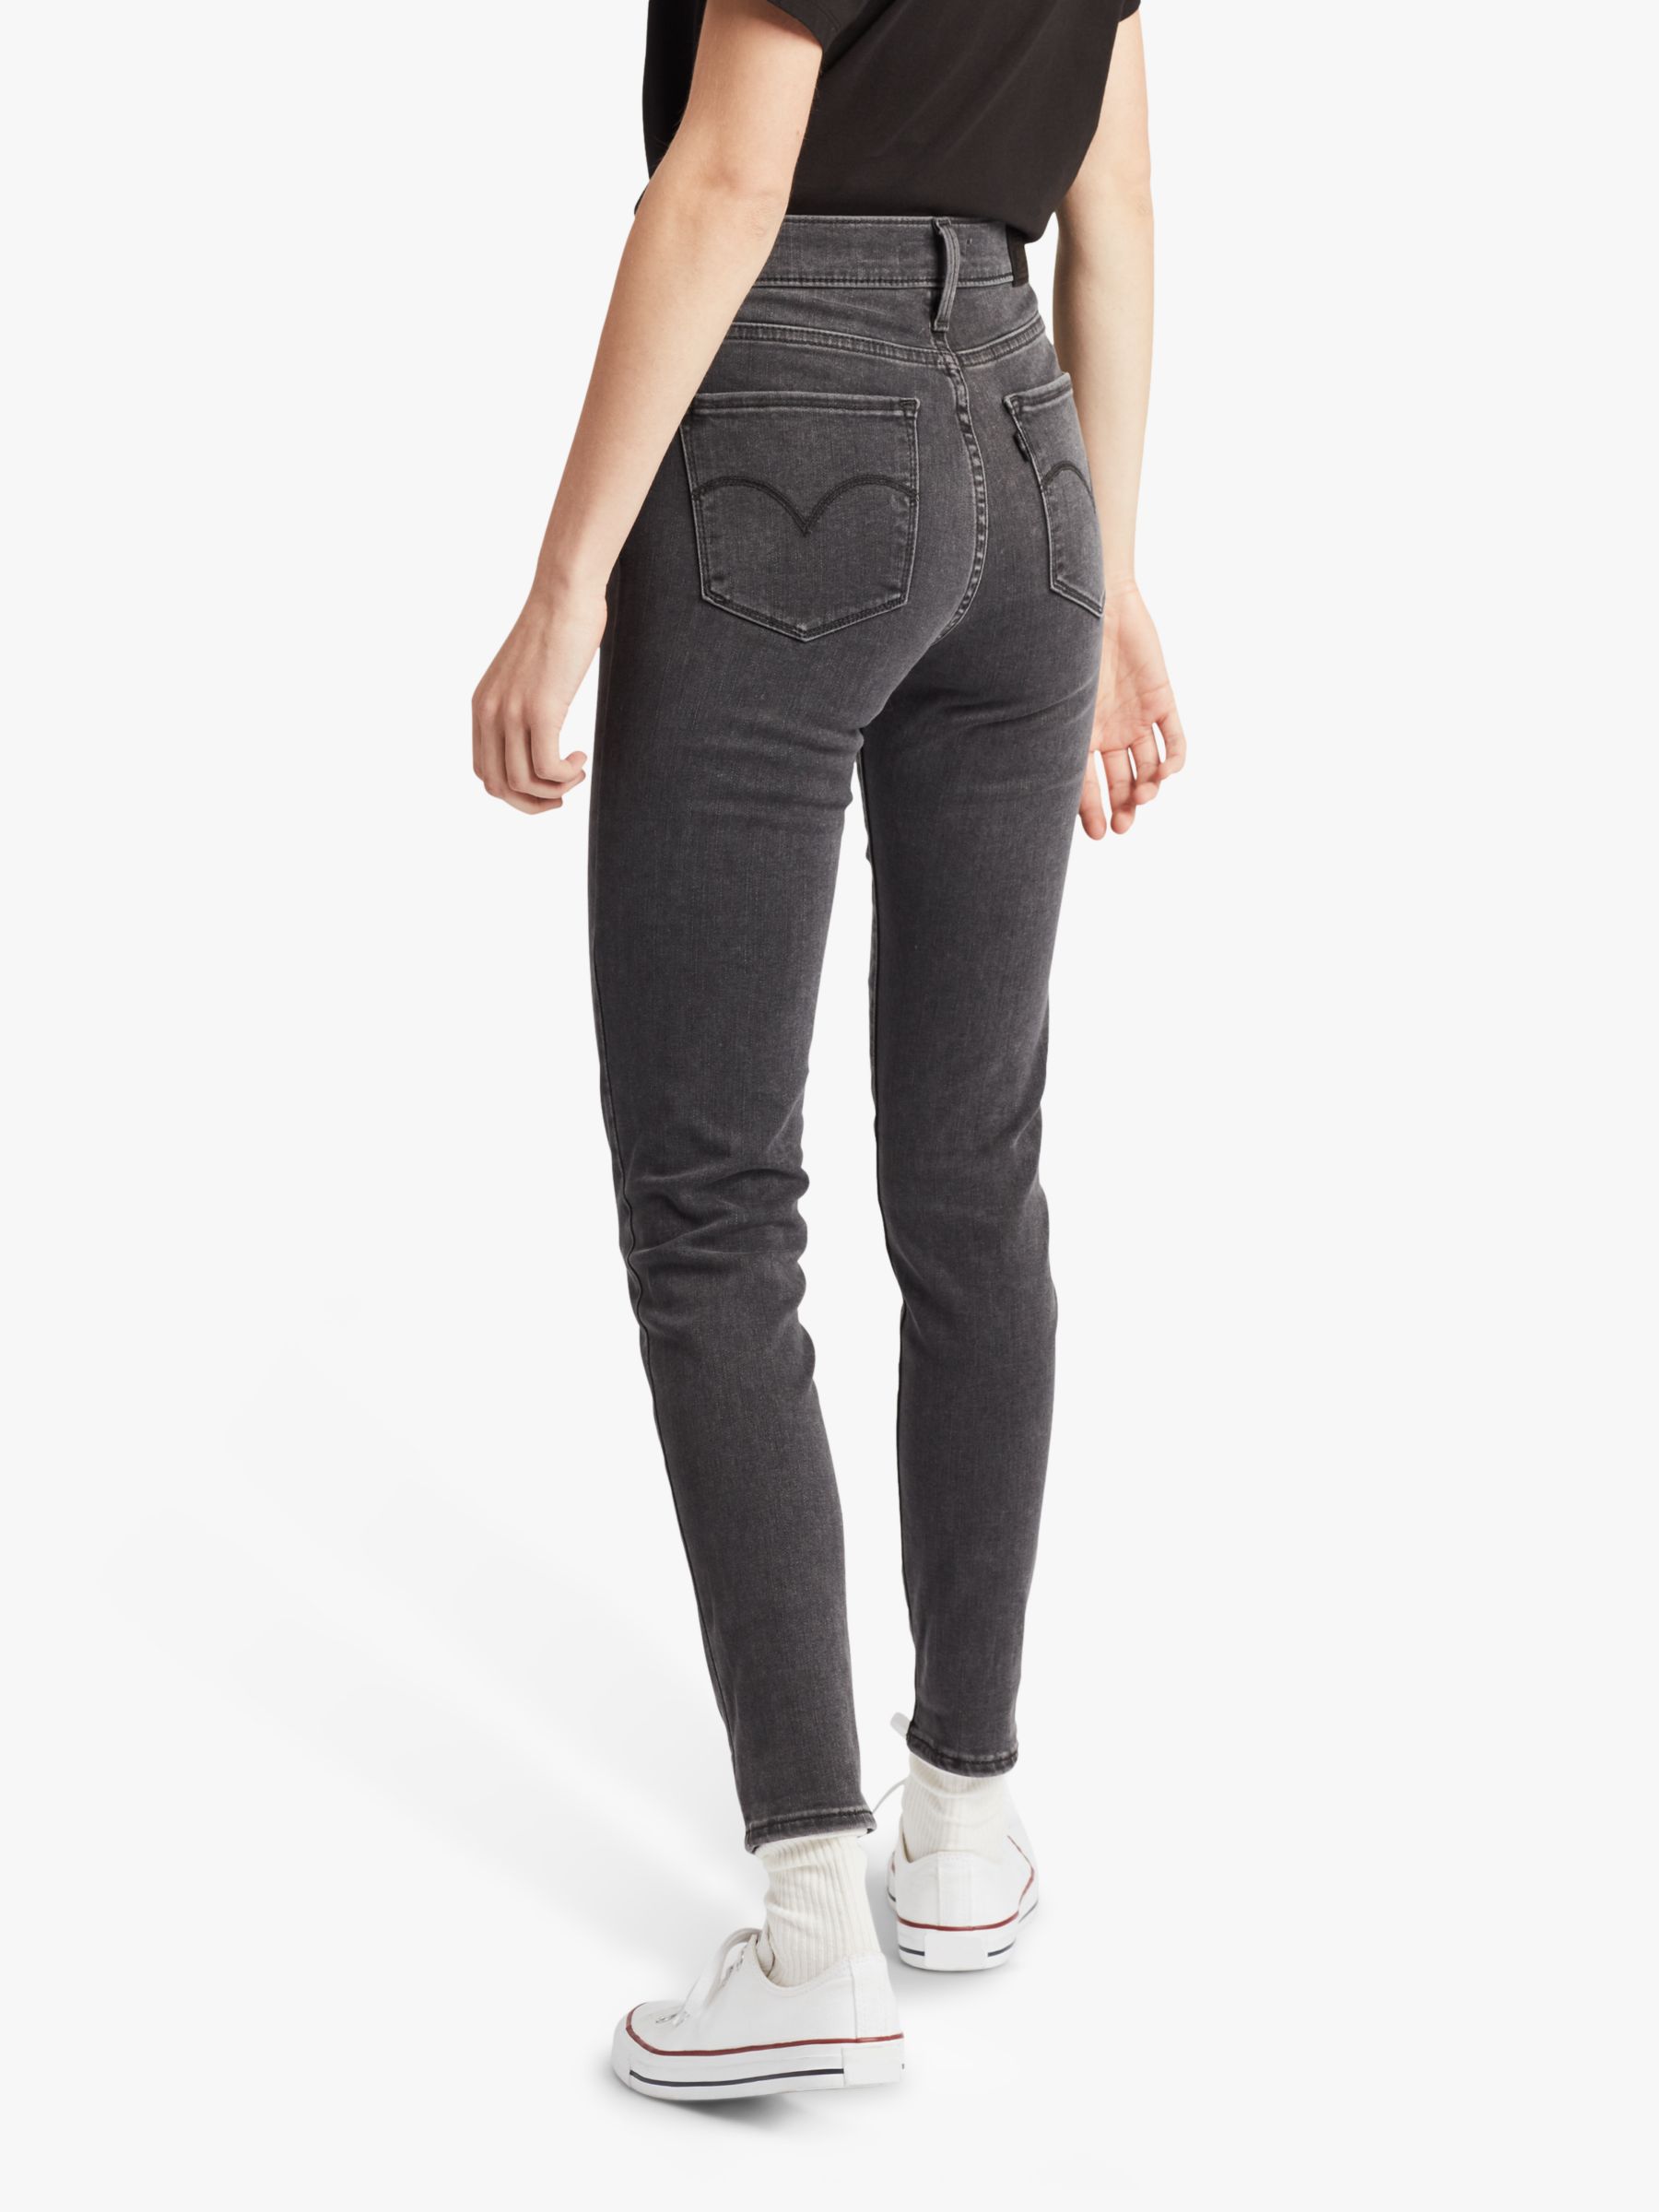 Levi's 720 High Rise Super Skinny Jeans, Fingers Crossed at John Lewis & Partners